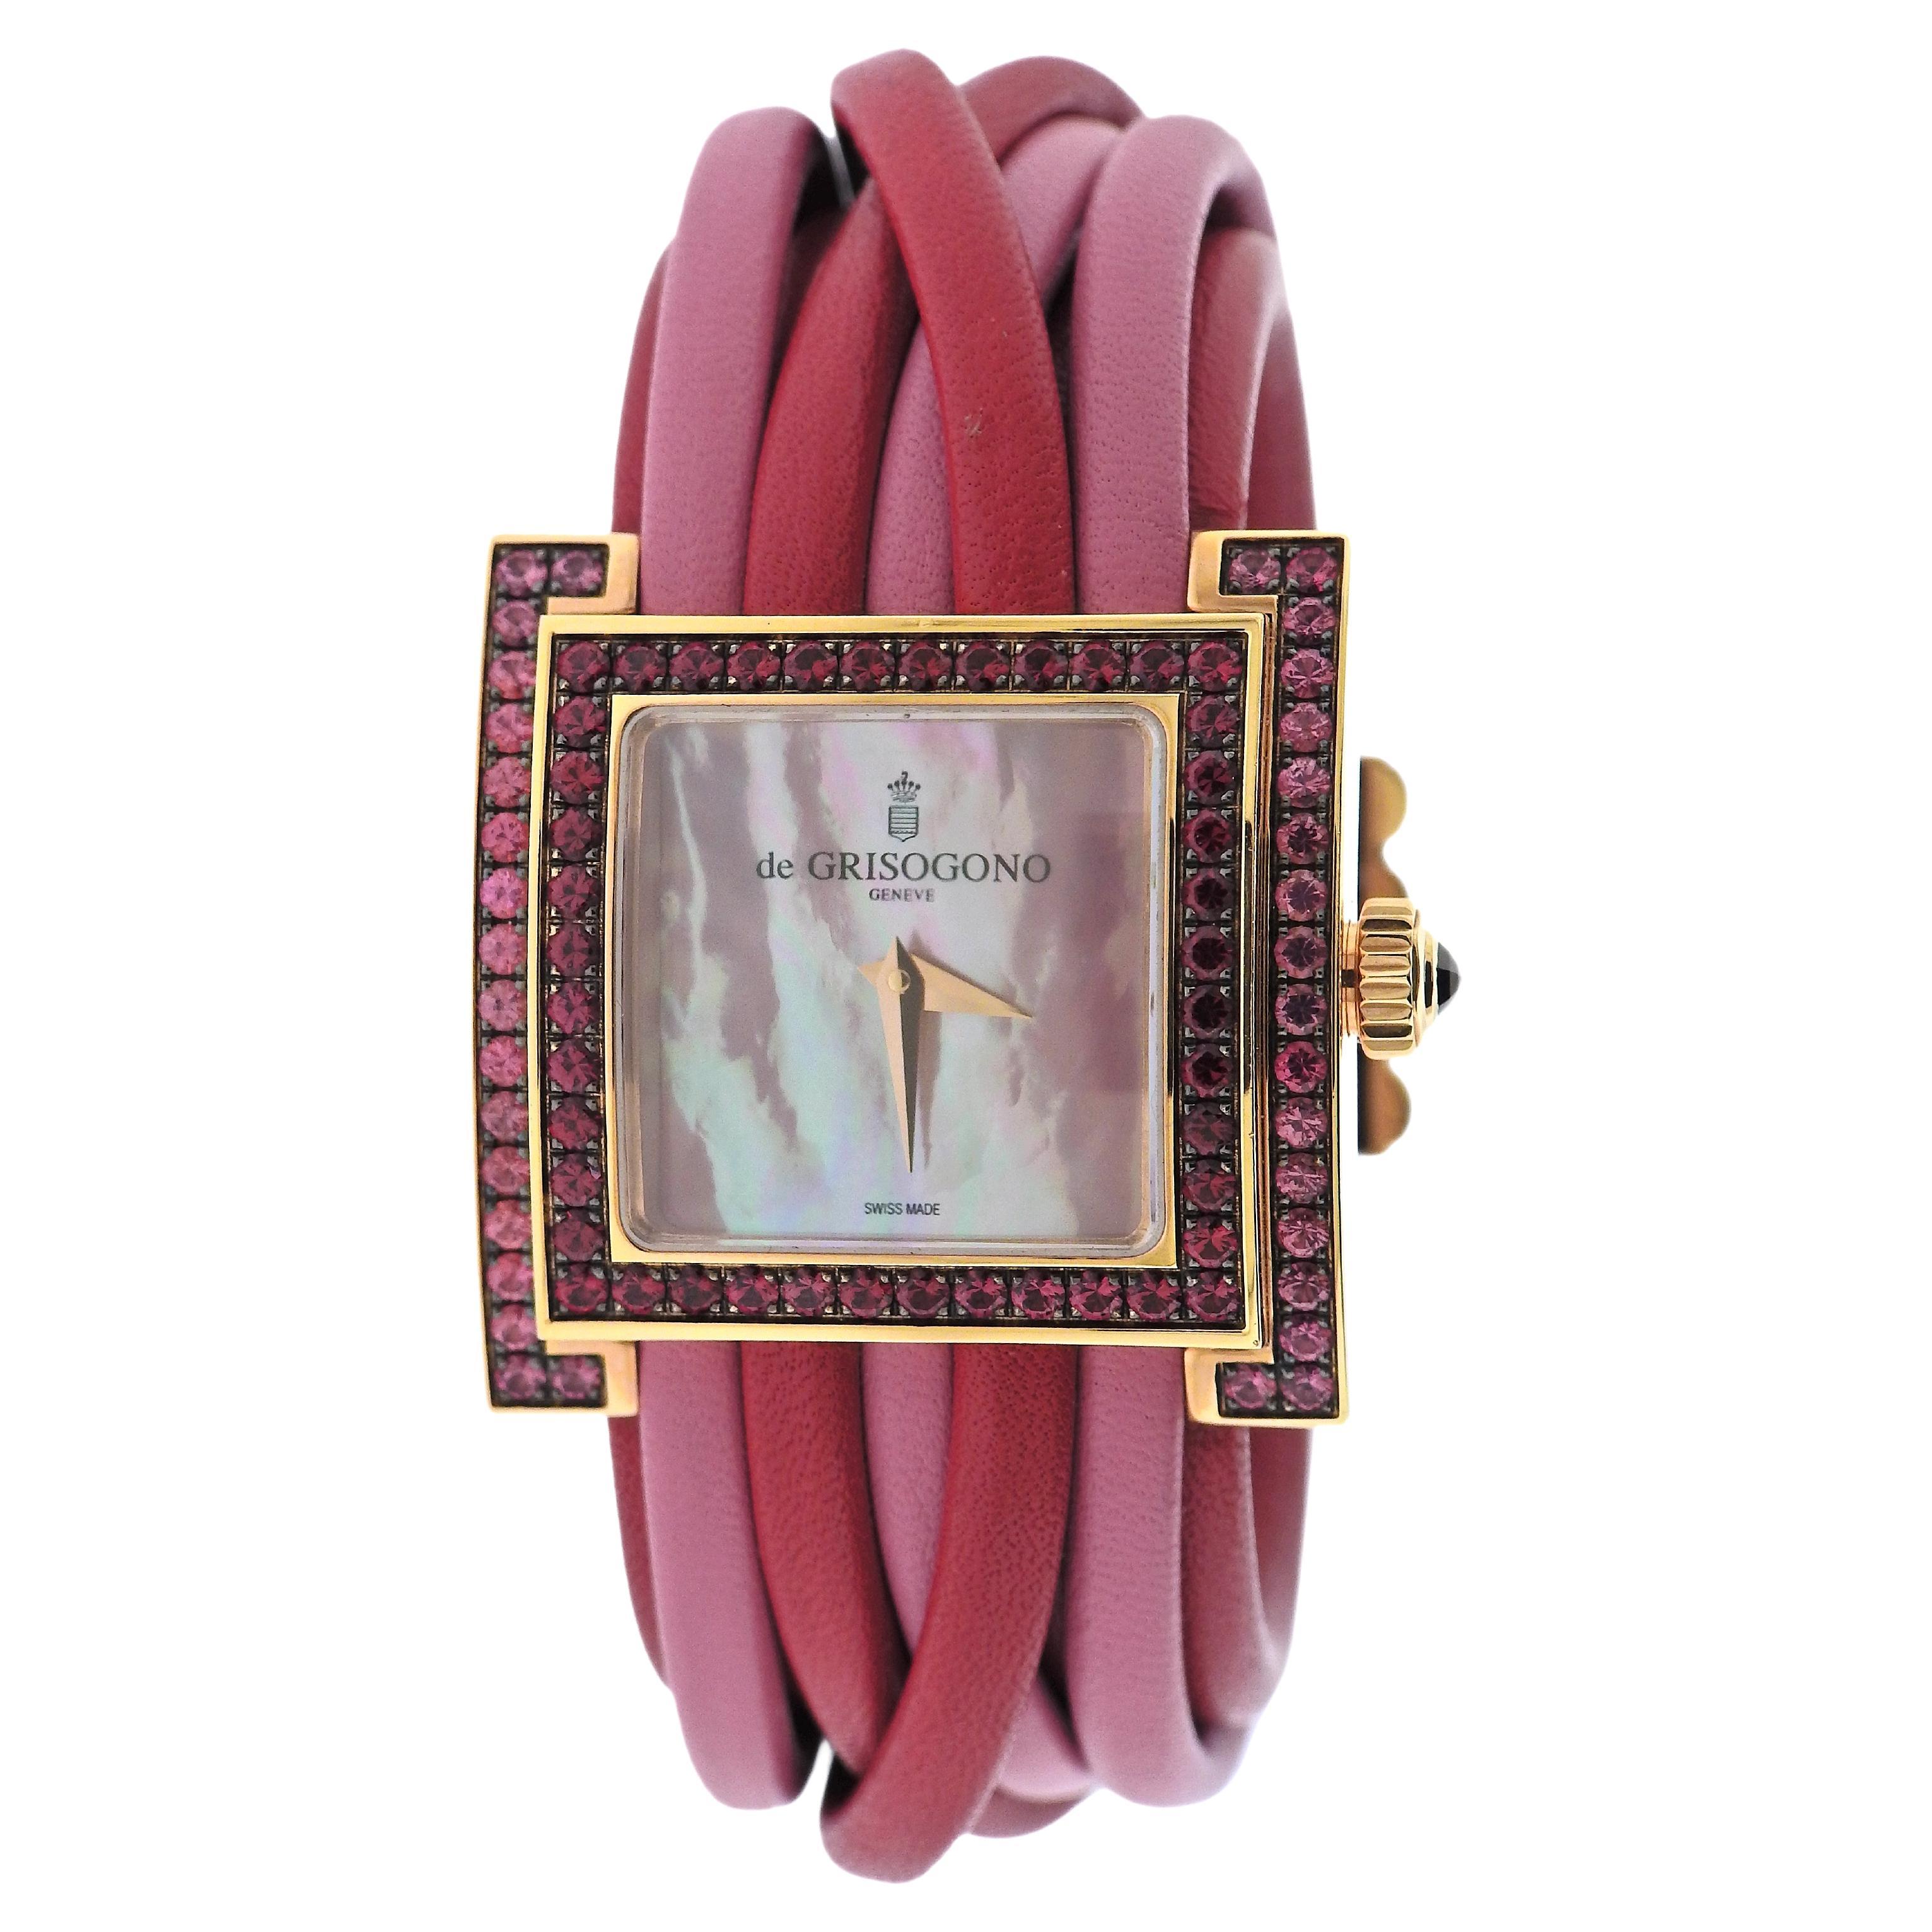 De Grisogono Allegra Ruby Sapphire Mother of Pearl Gold Watch 3995 13 For Sale